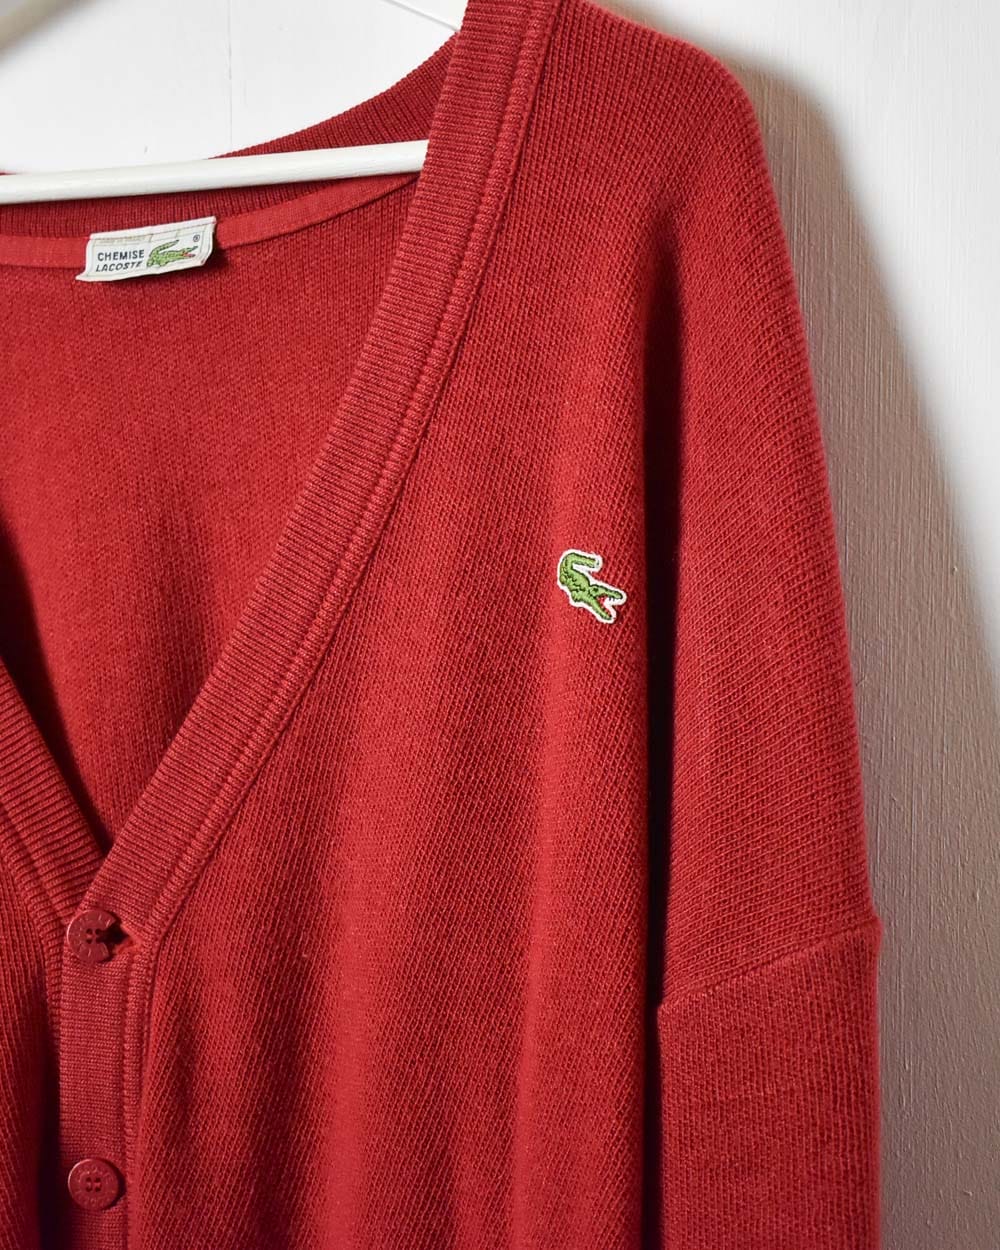 Red Chemise Lacoste Knitted Cardigan - X-Large